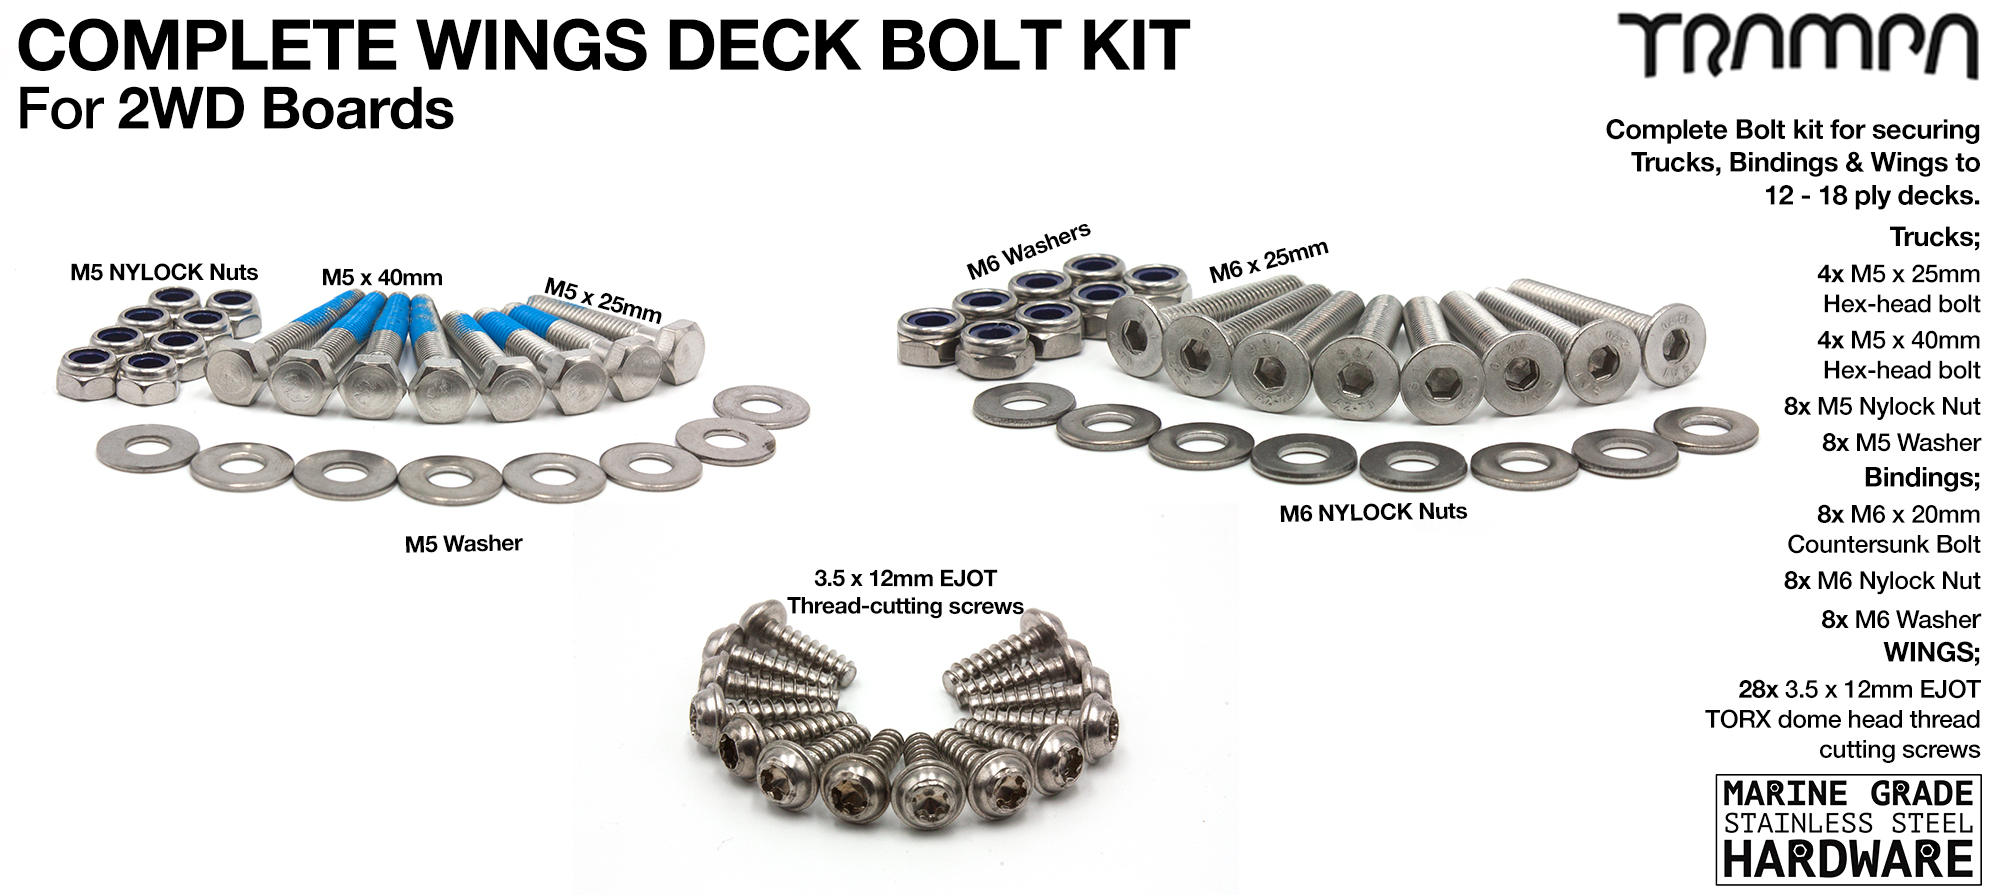 Marine Grade Stainless Steel Complete 2WD WING Deck Bolt Kit - 16/18ply  